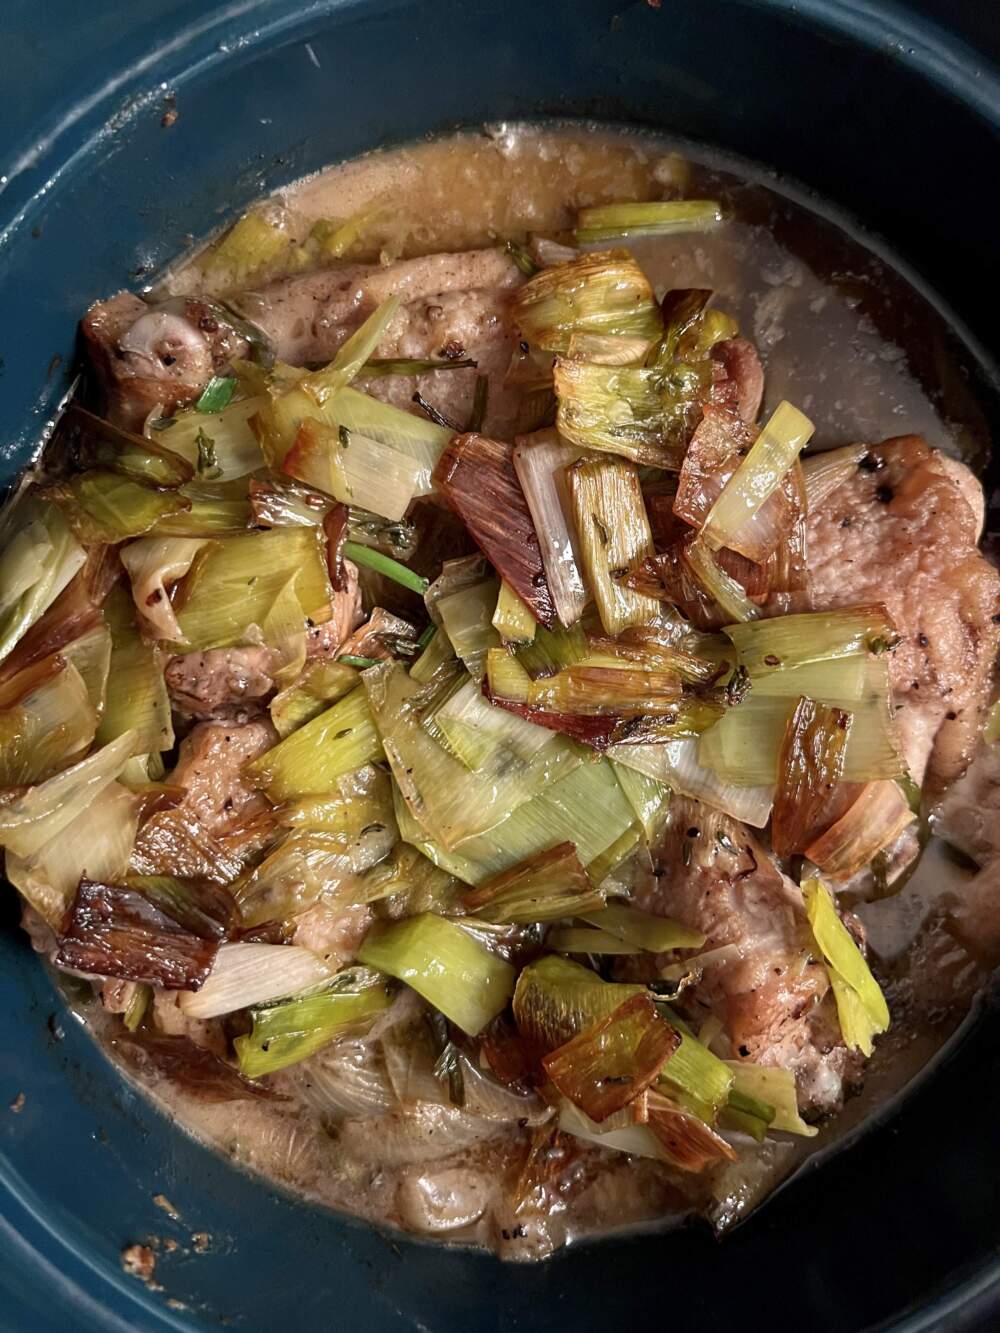 Six onion braised chicken with chives. (Kathy Gunst/Here & Now)